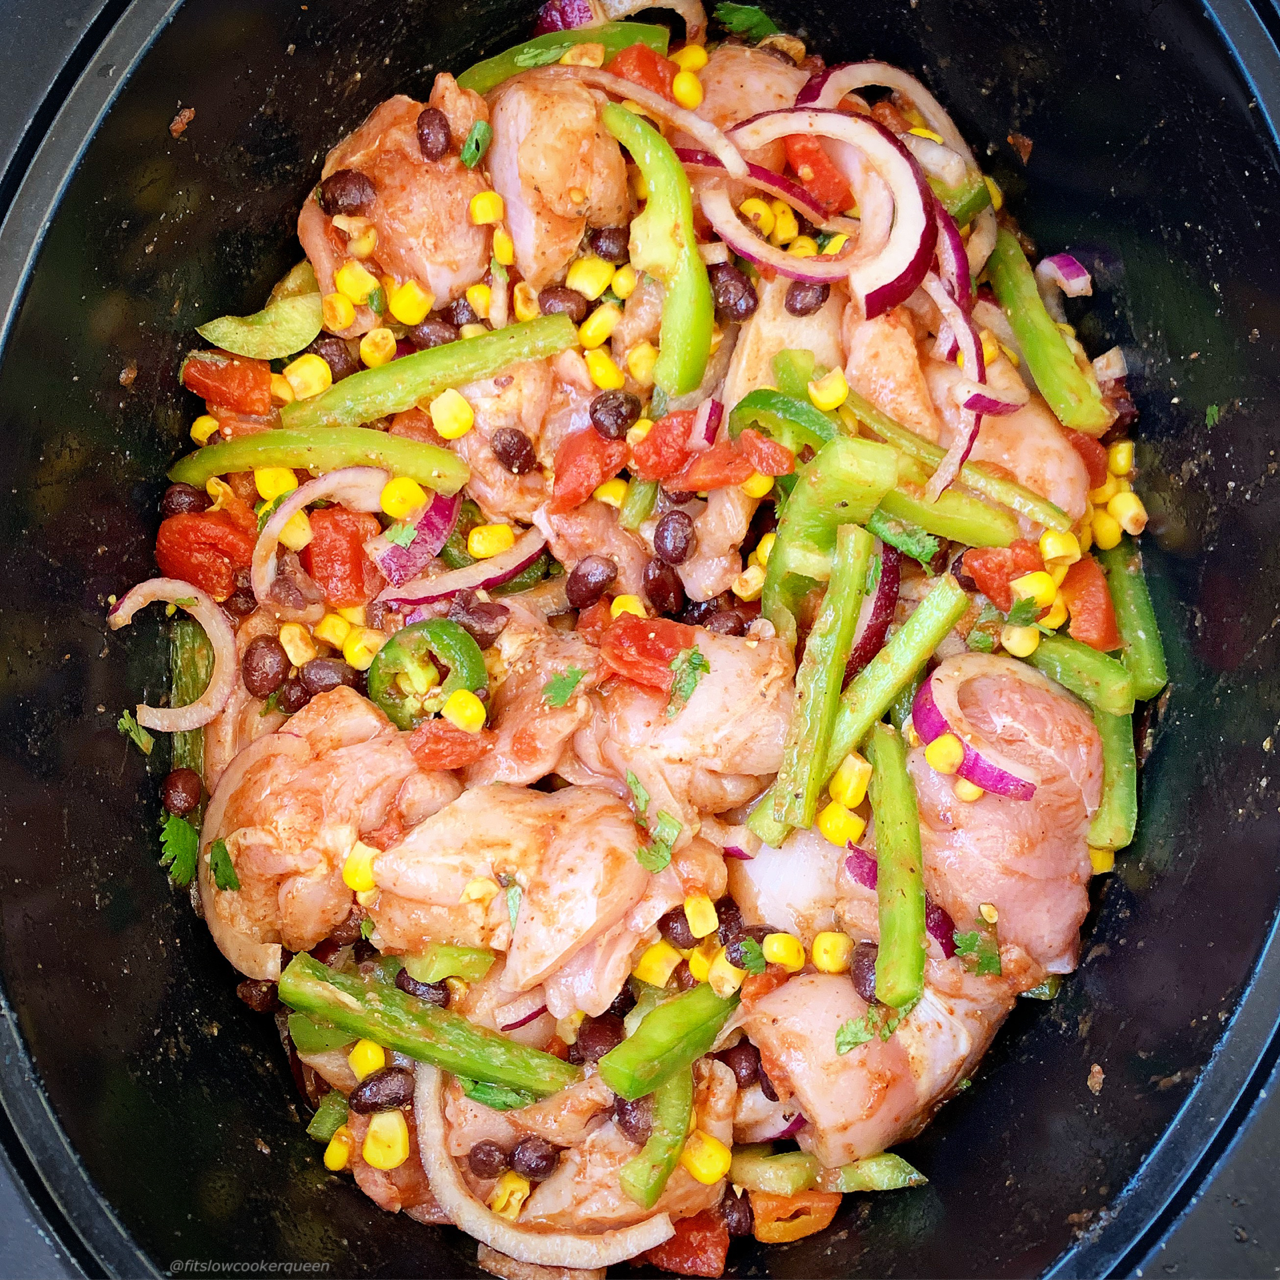 Santa Fe chicken is an easy and flavorful TexMex inspired recipe that can be made in your slow cooker or Instant Pot.